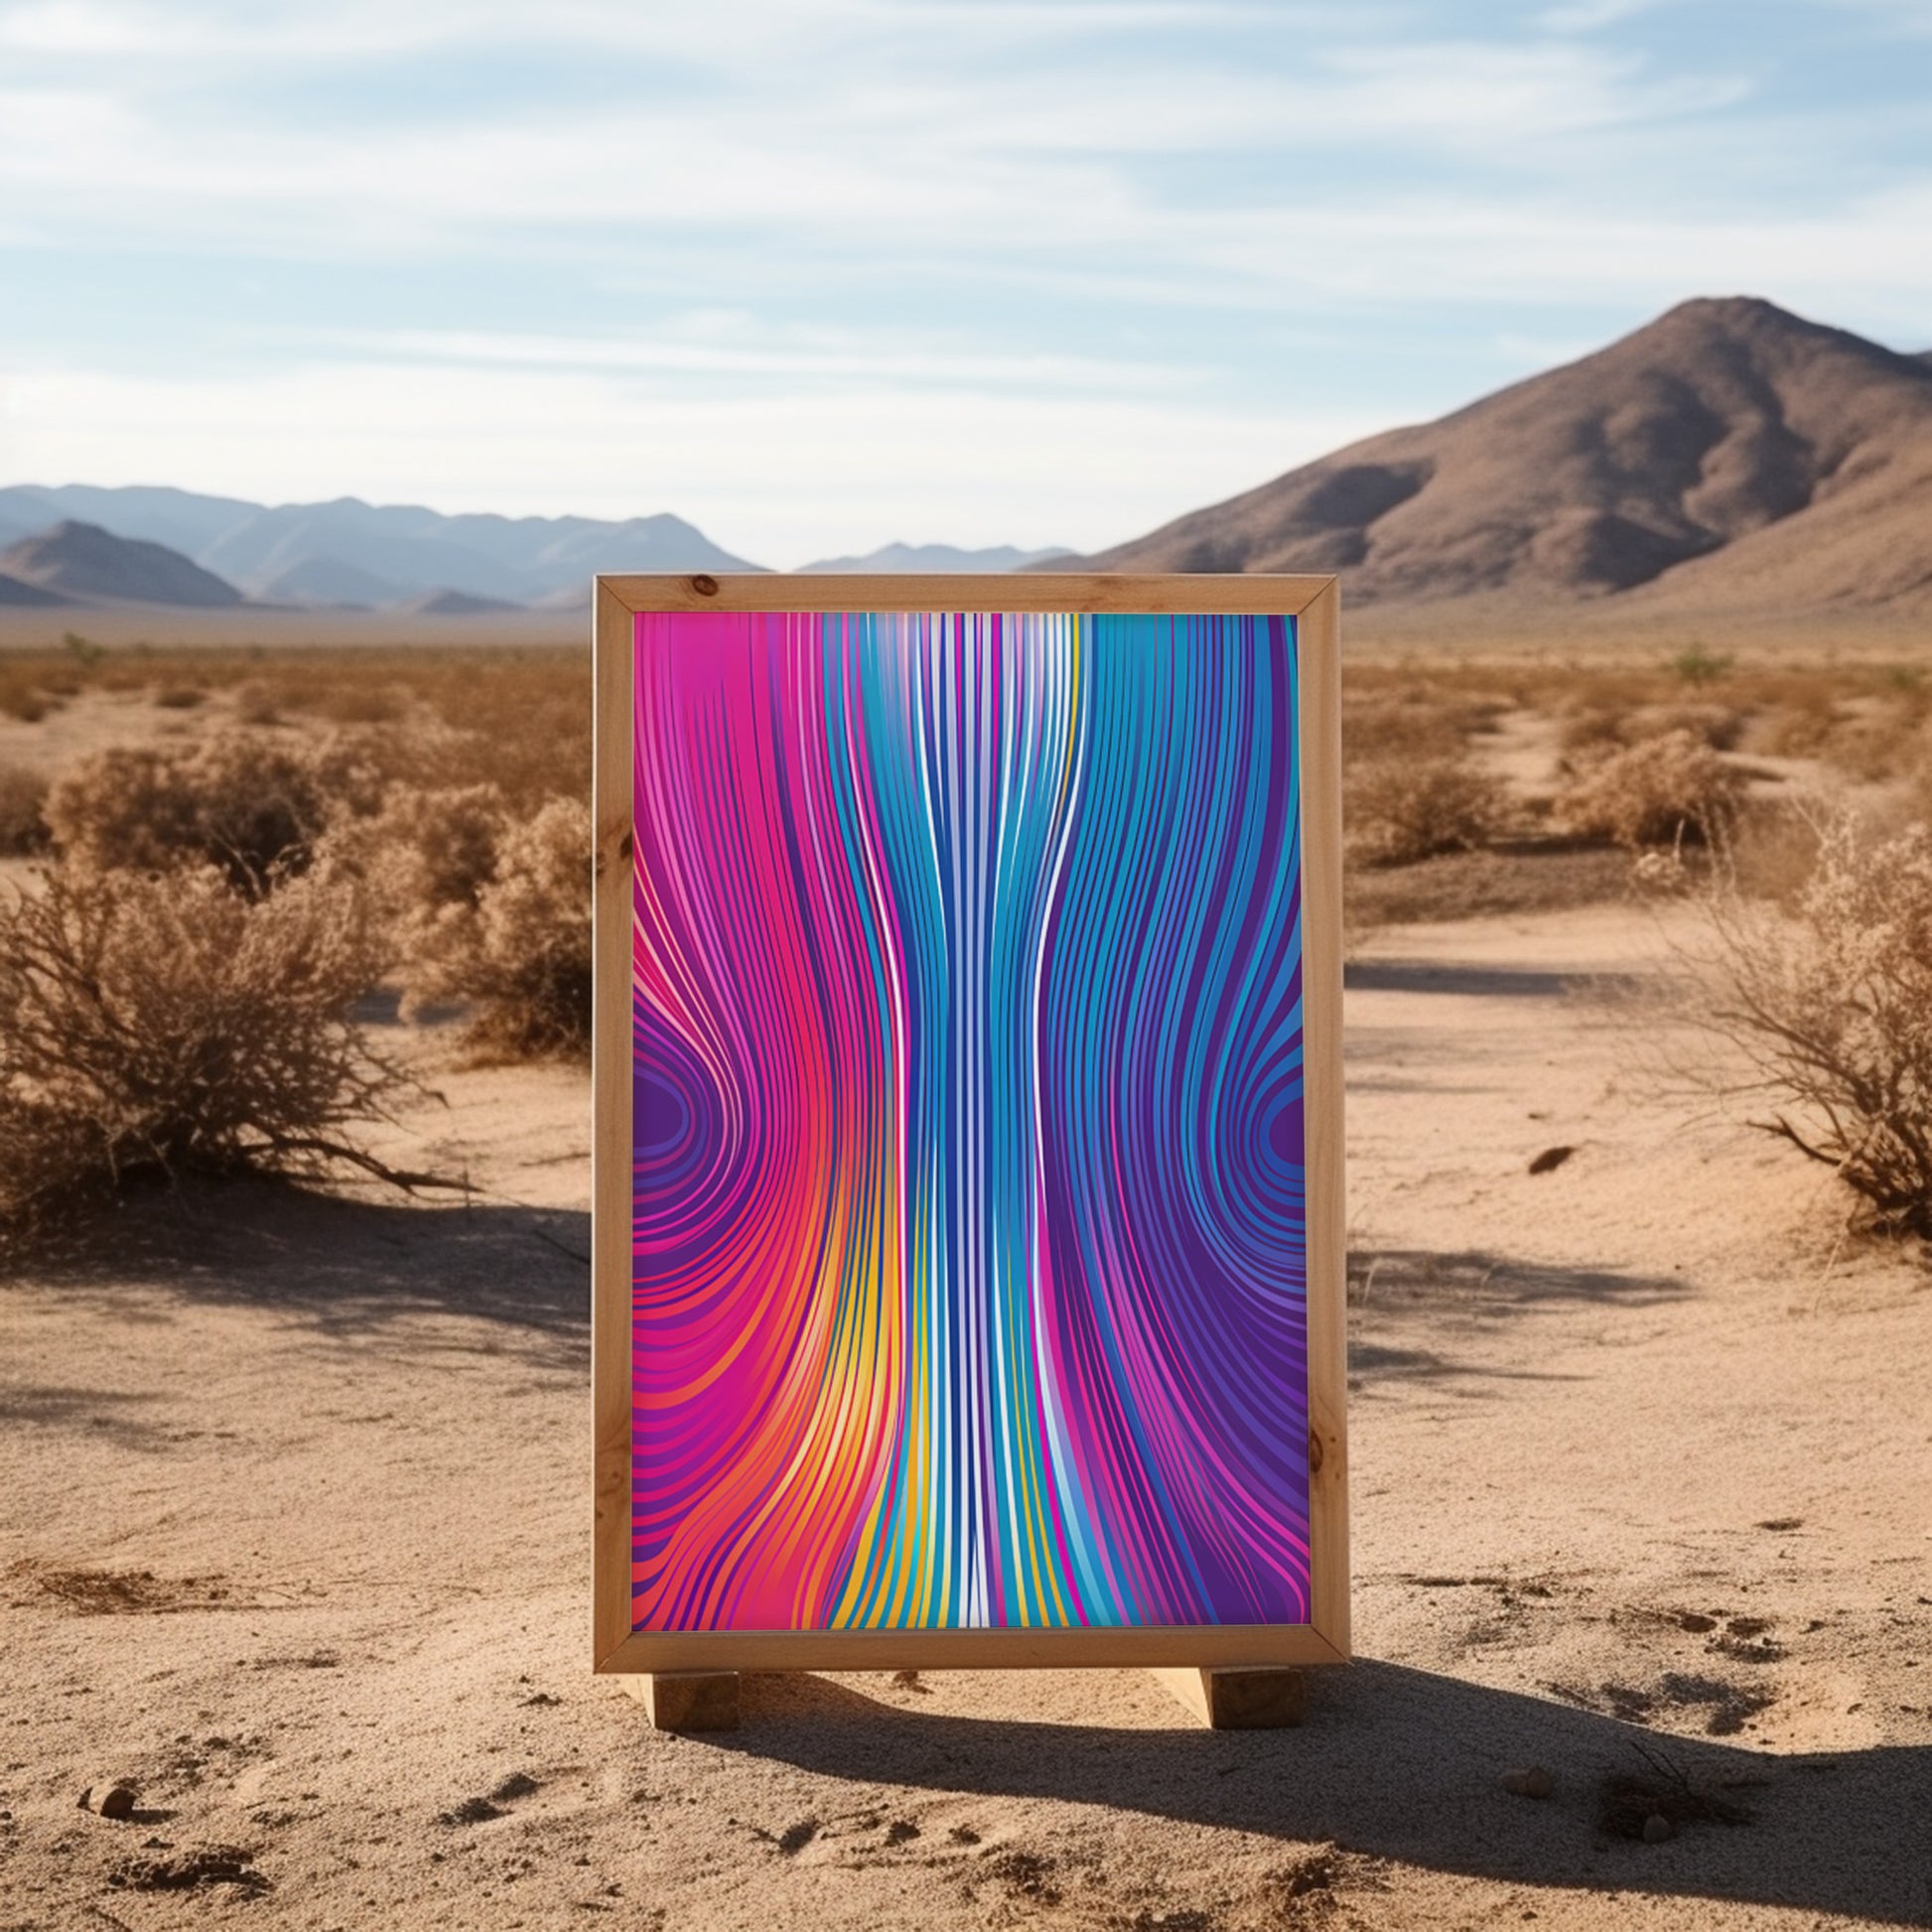 Abstract colorful artwork on an easel in a desert landscape.